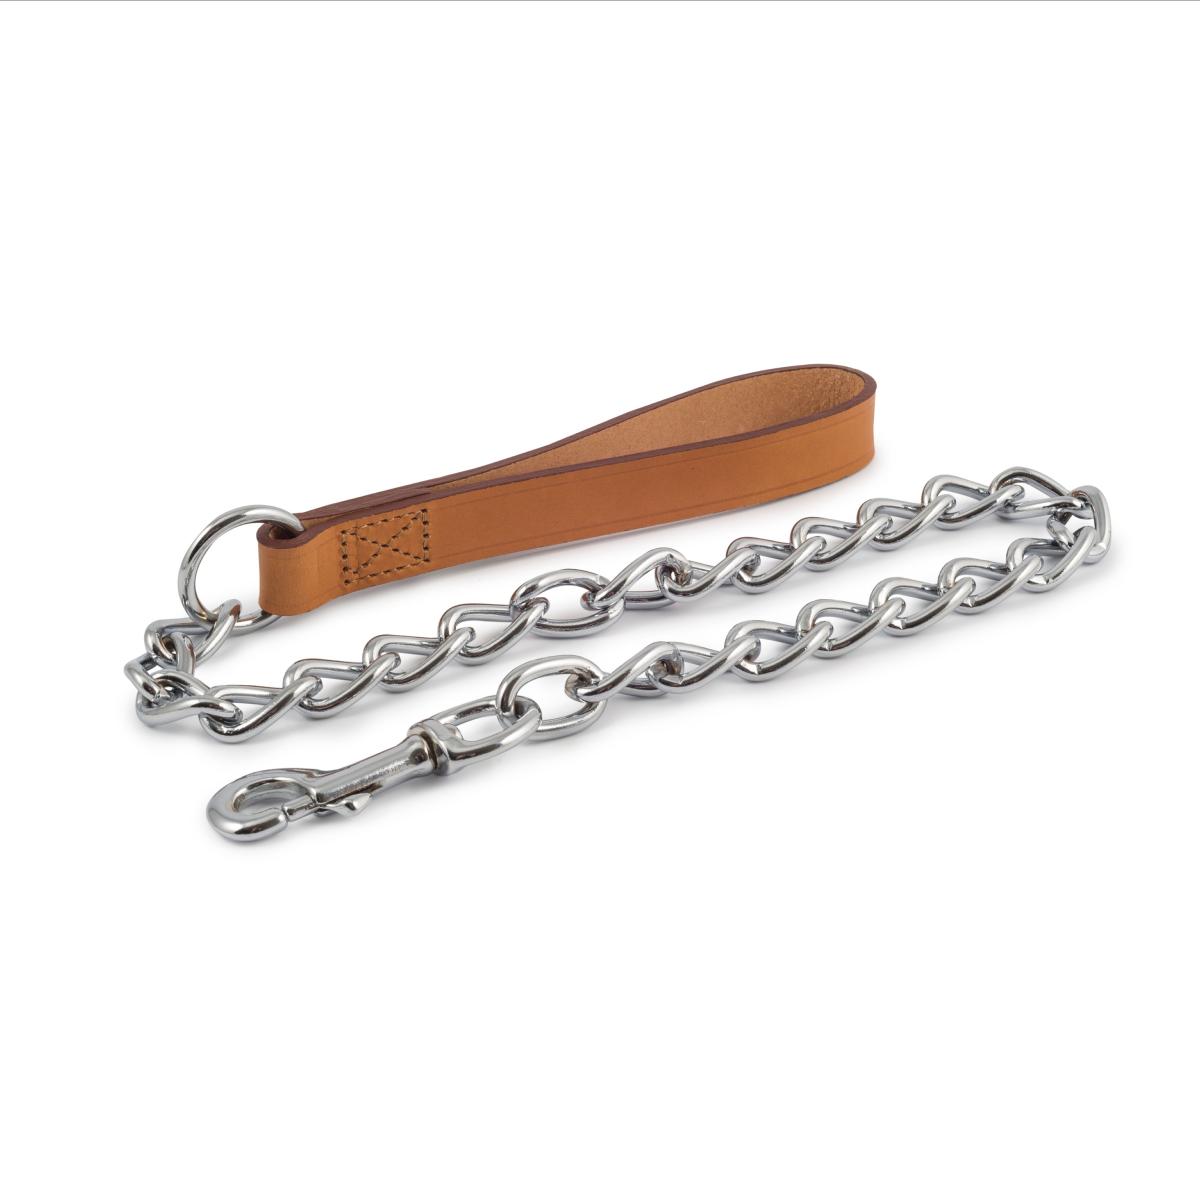 Ancol Leather Handle Chain Dog Lead - Extra Heavy